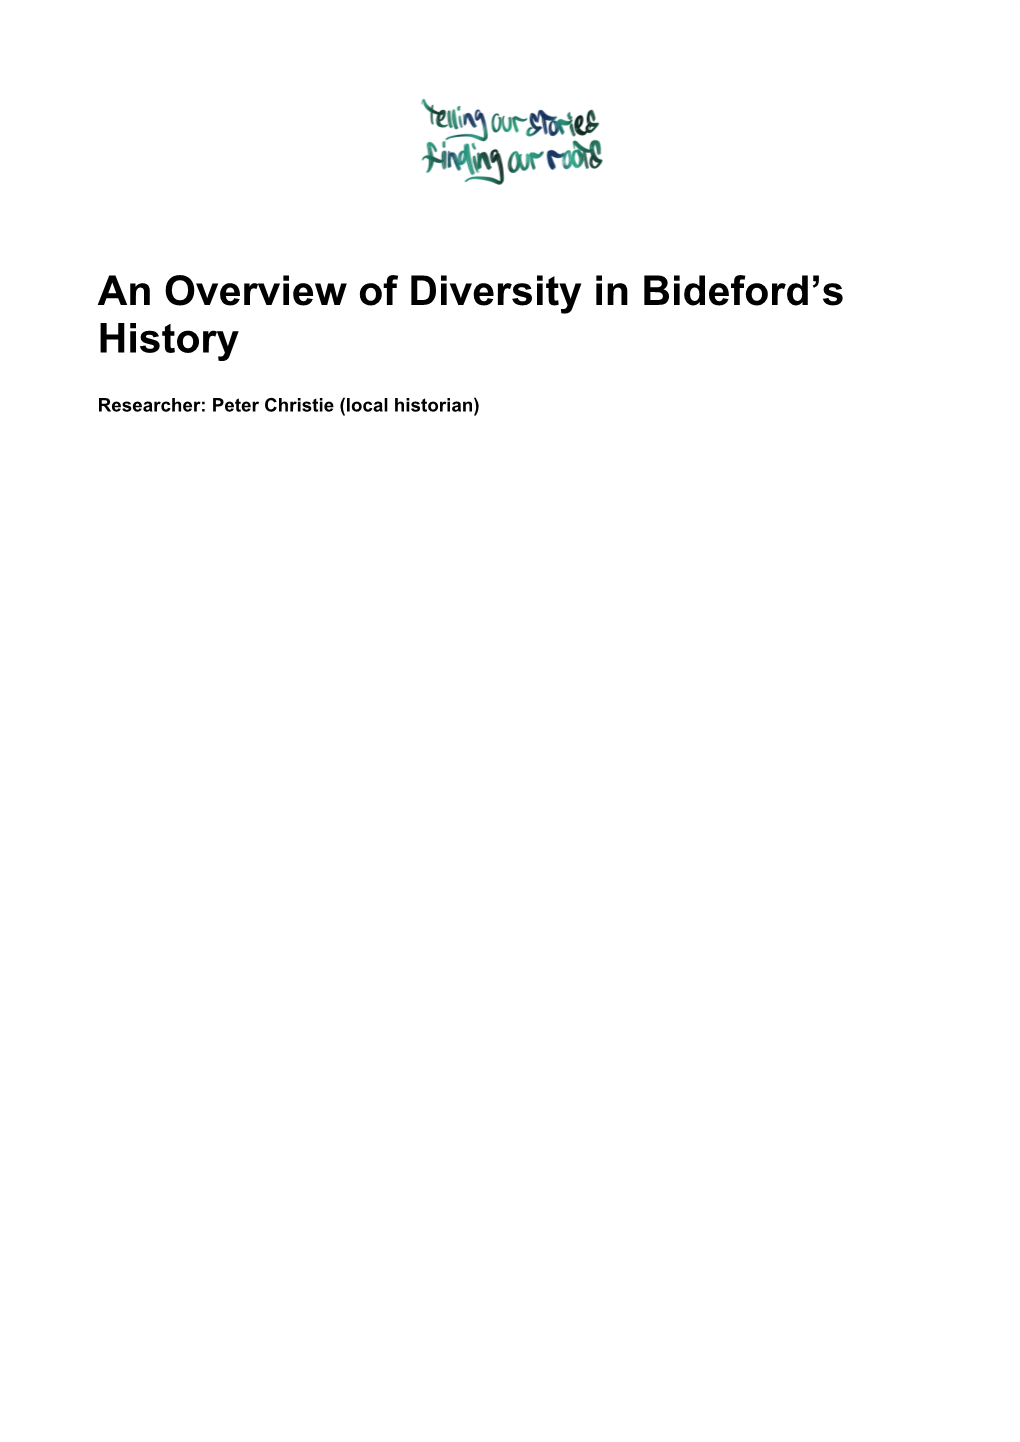 An Overview of Diversity in Bideford's History